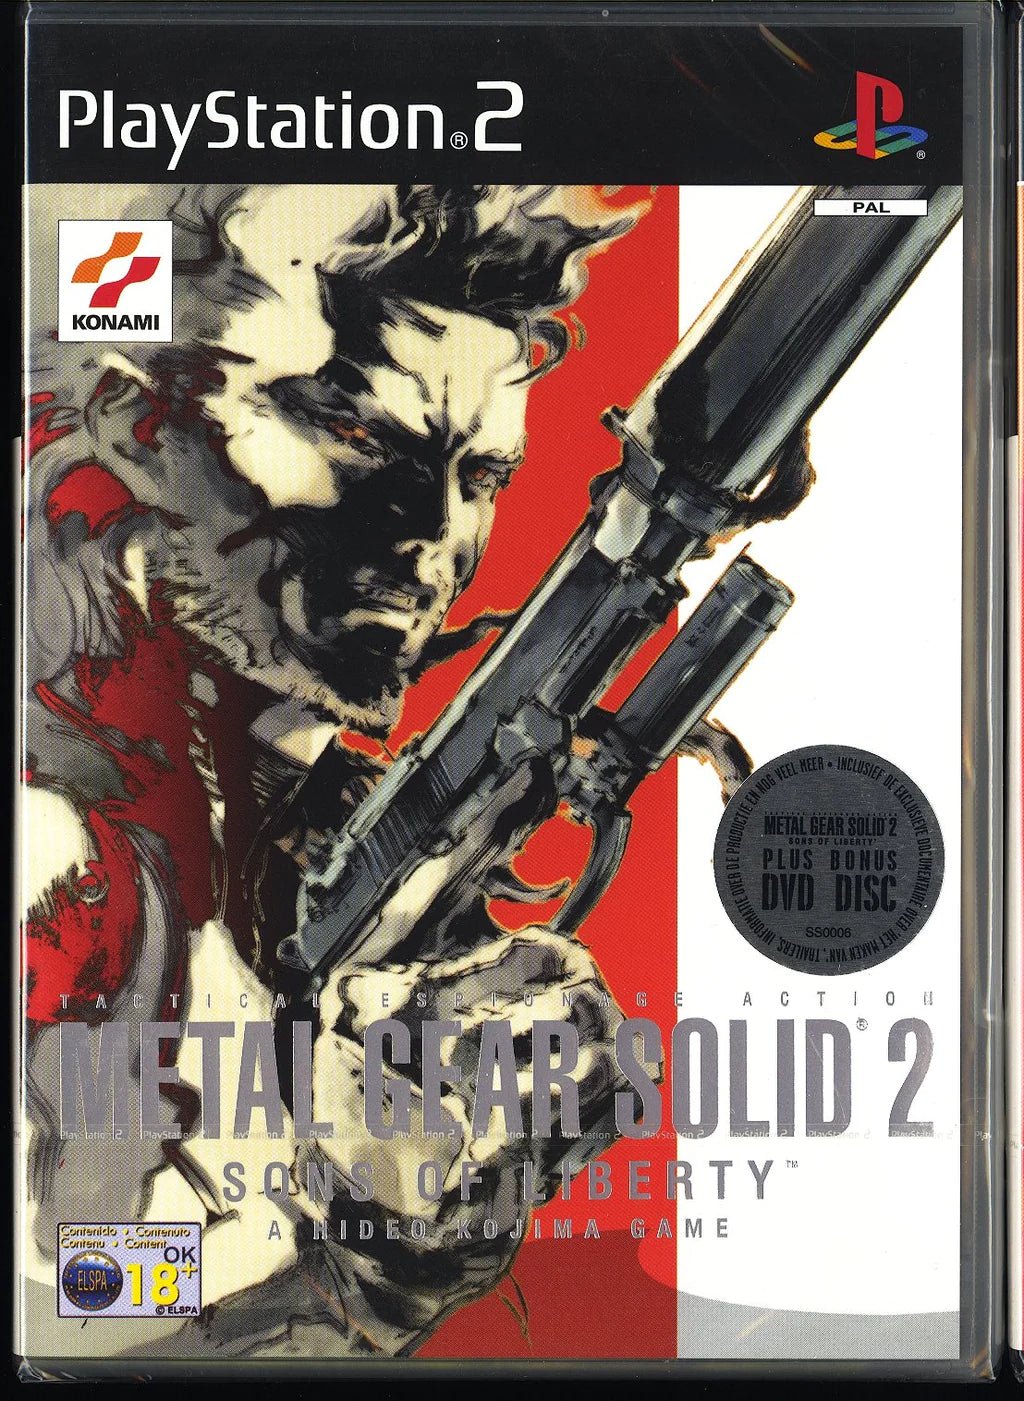 An image of the game, console, or accessory Metal Gear Solid 2 - (CIB) (Playstation 2)